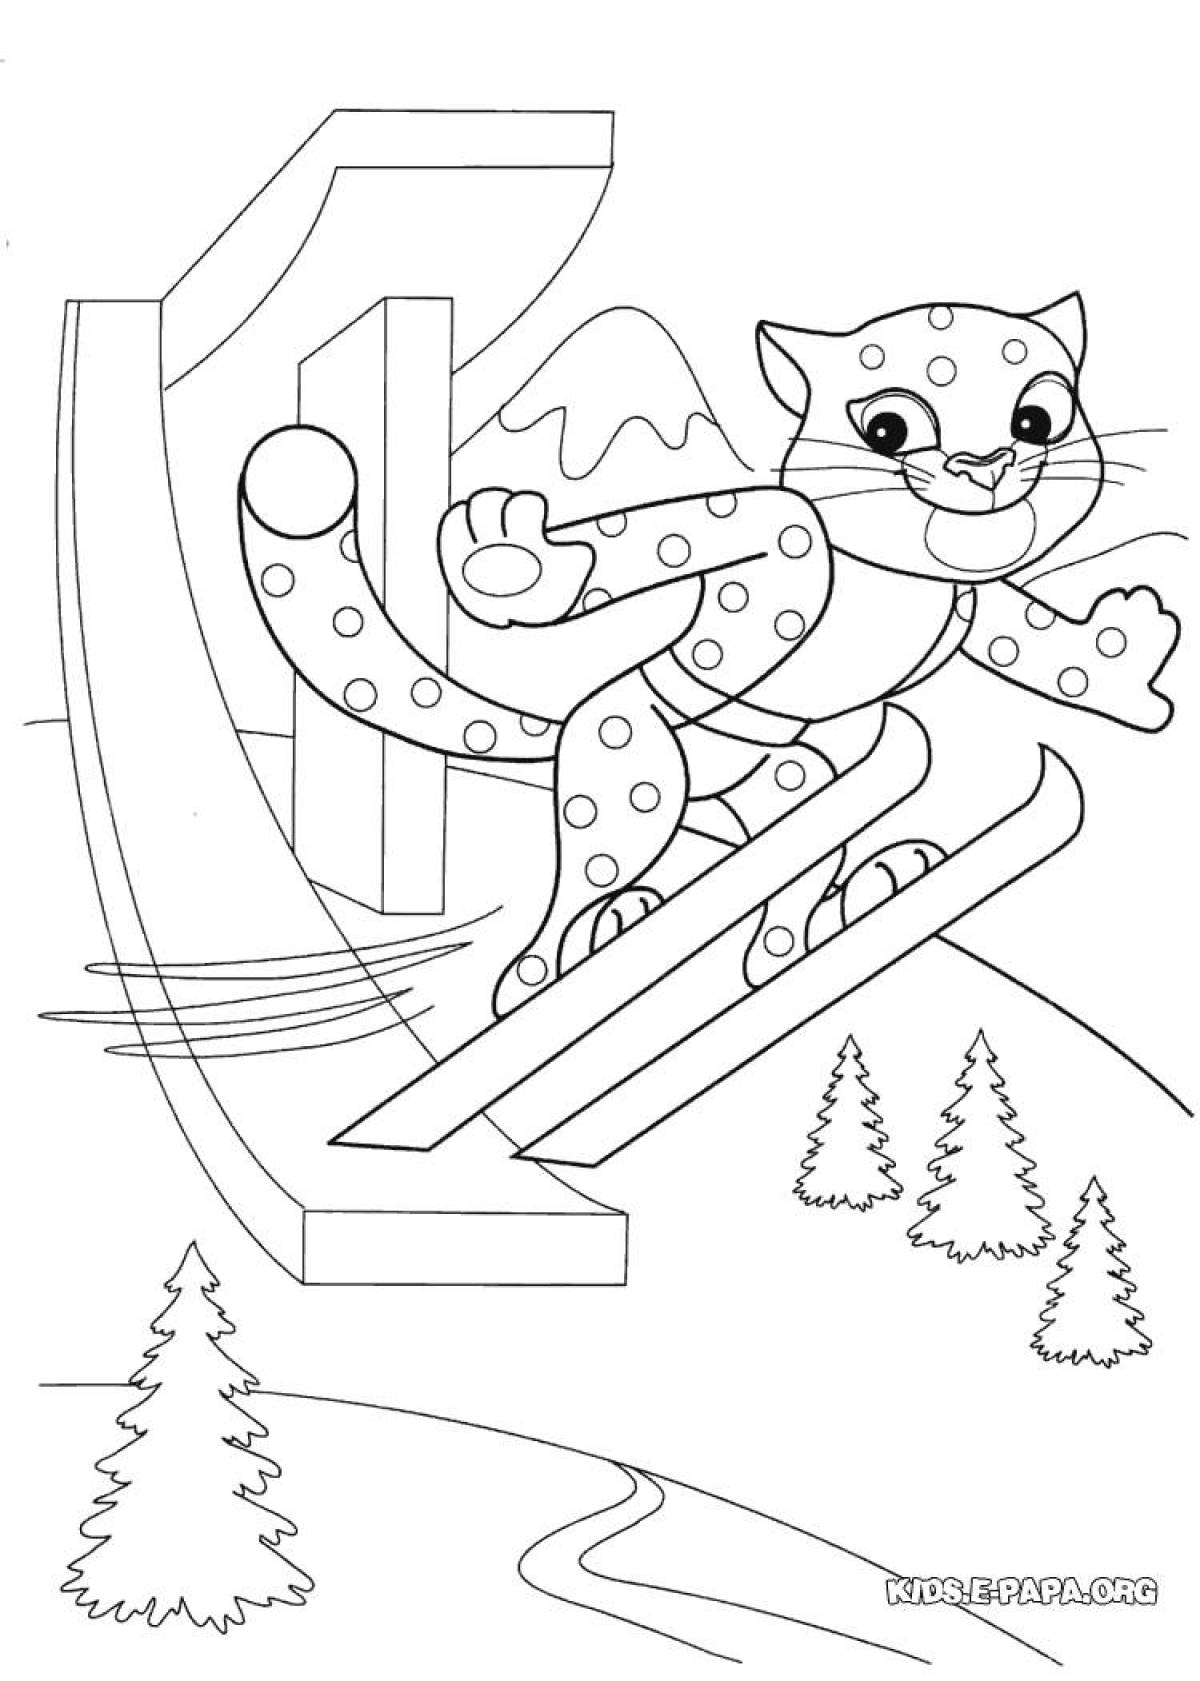 Colorful winter sports coloring page for kids